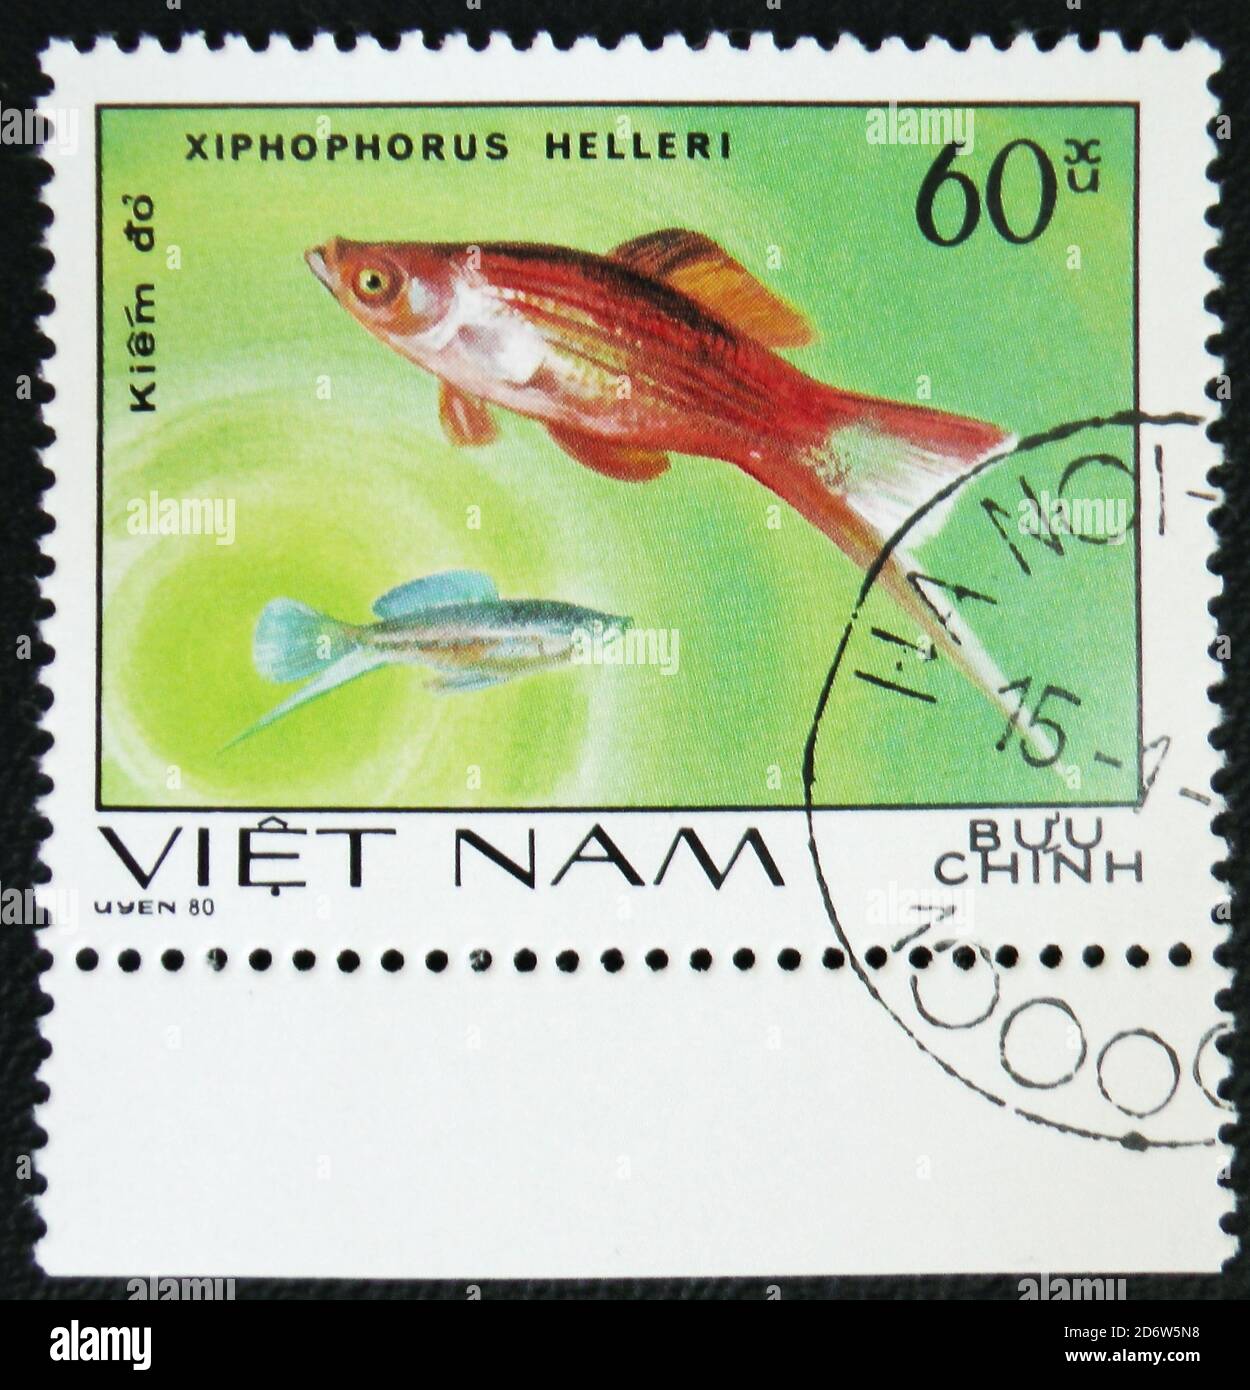 MOSCOW, RUSSIA - JANUARY 7, 2017: A stamp printed by Vietnam shows fish Xiphophorus helleri, stamp is from the series, circa 1980 Stock Photo